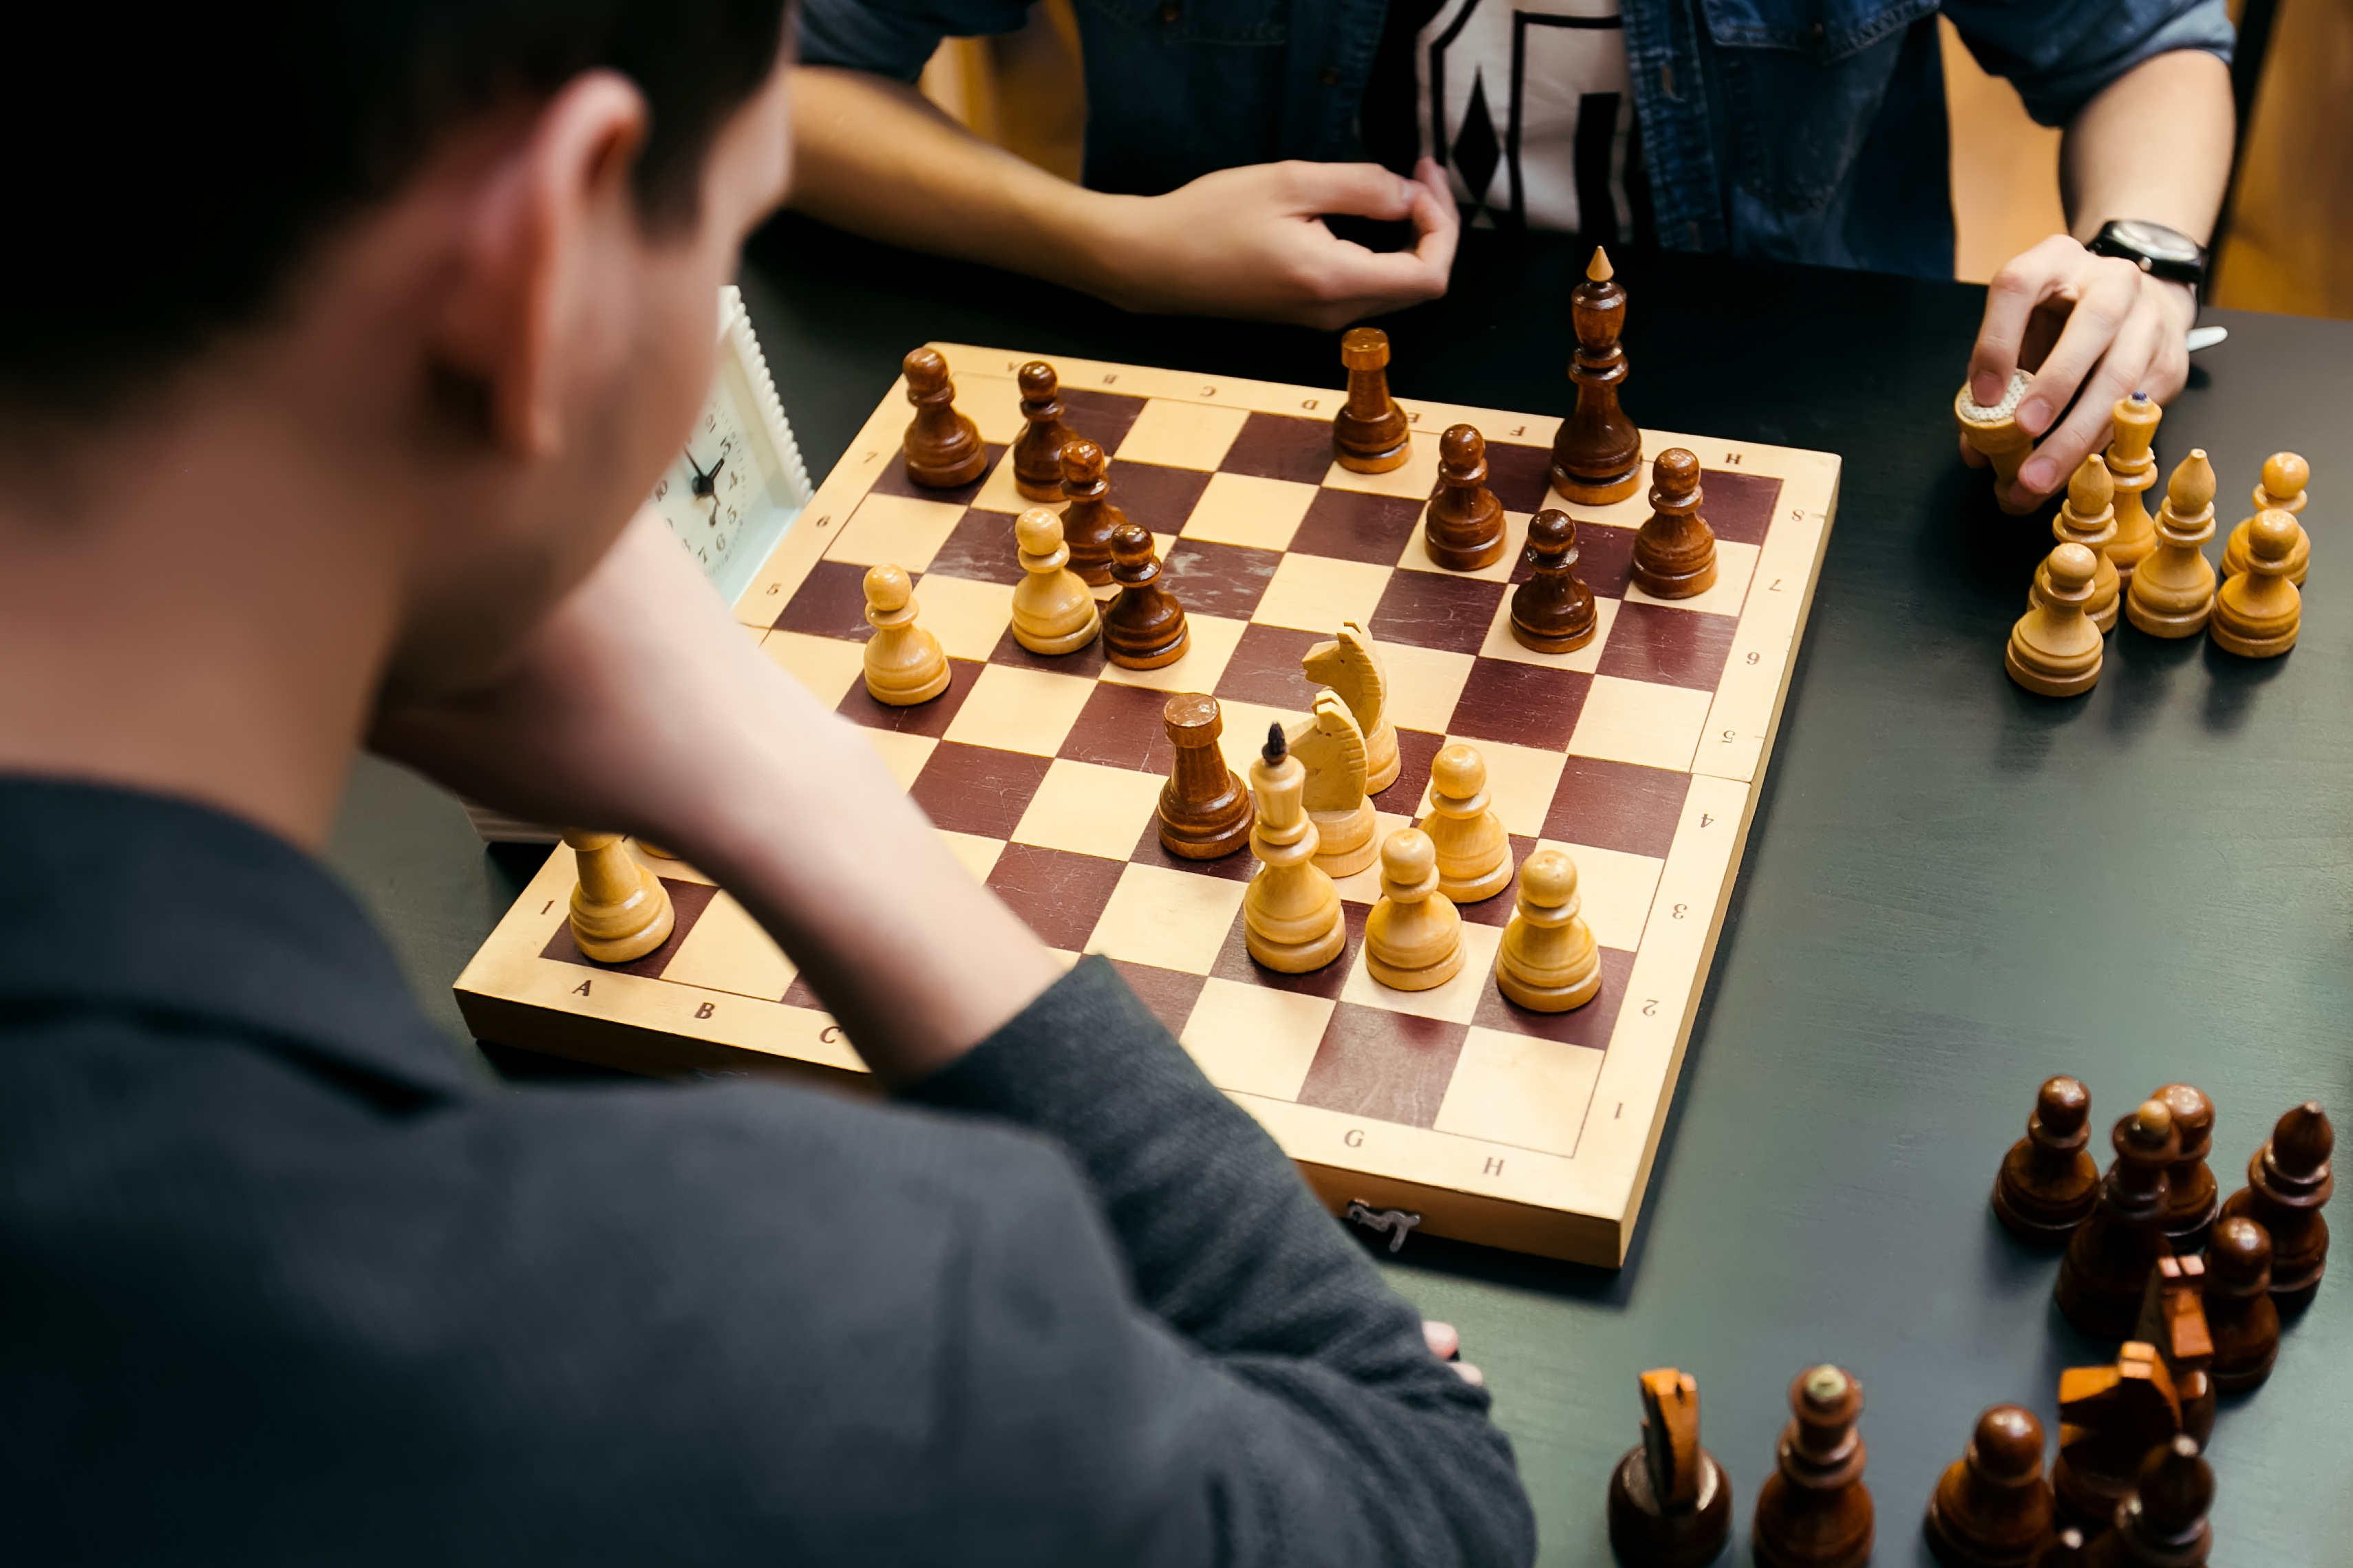 A Guide to Help Scholastic Chess Players Avoid Mental and Physical